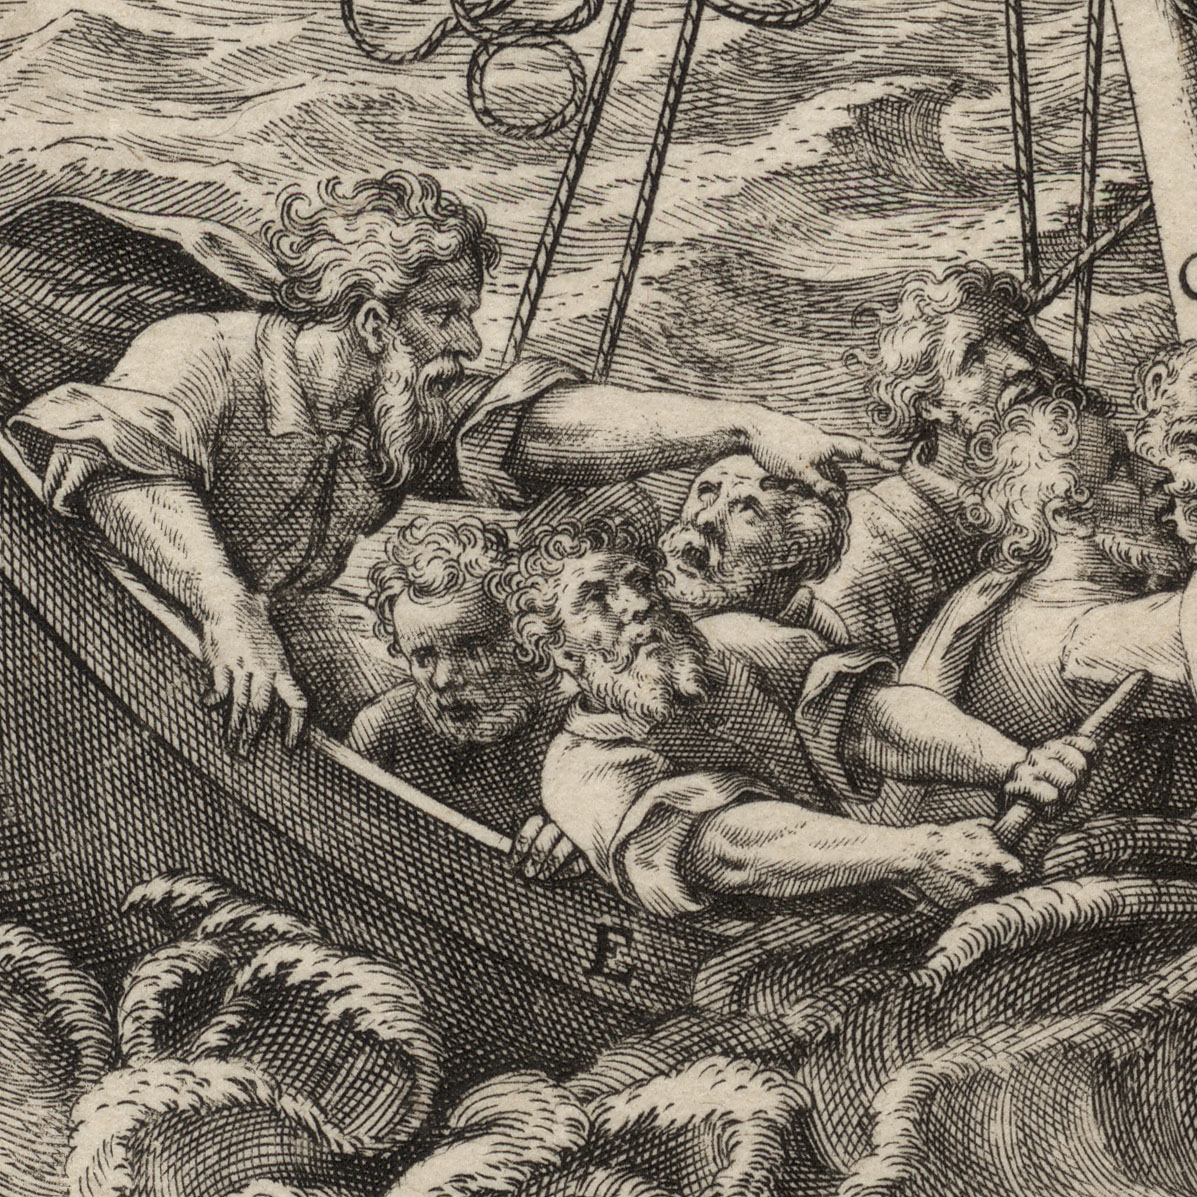 Prints and Principles: Adriaen Collaert's engraving, “The Miracle of ...